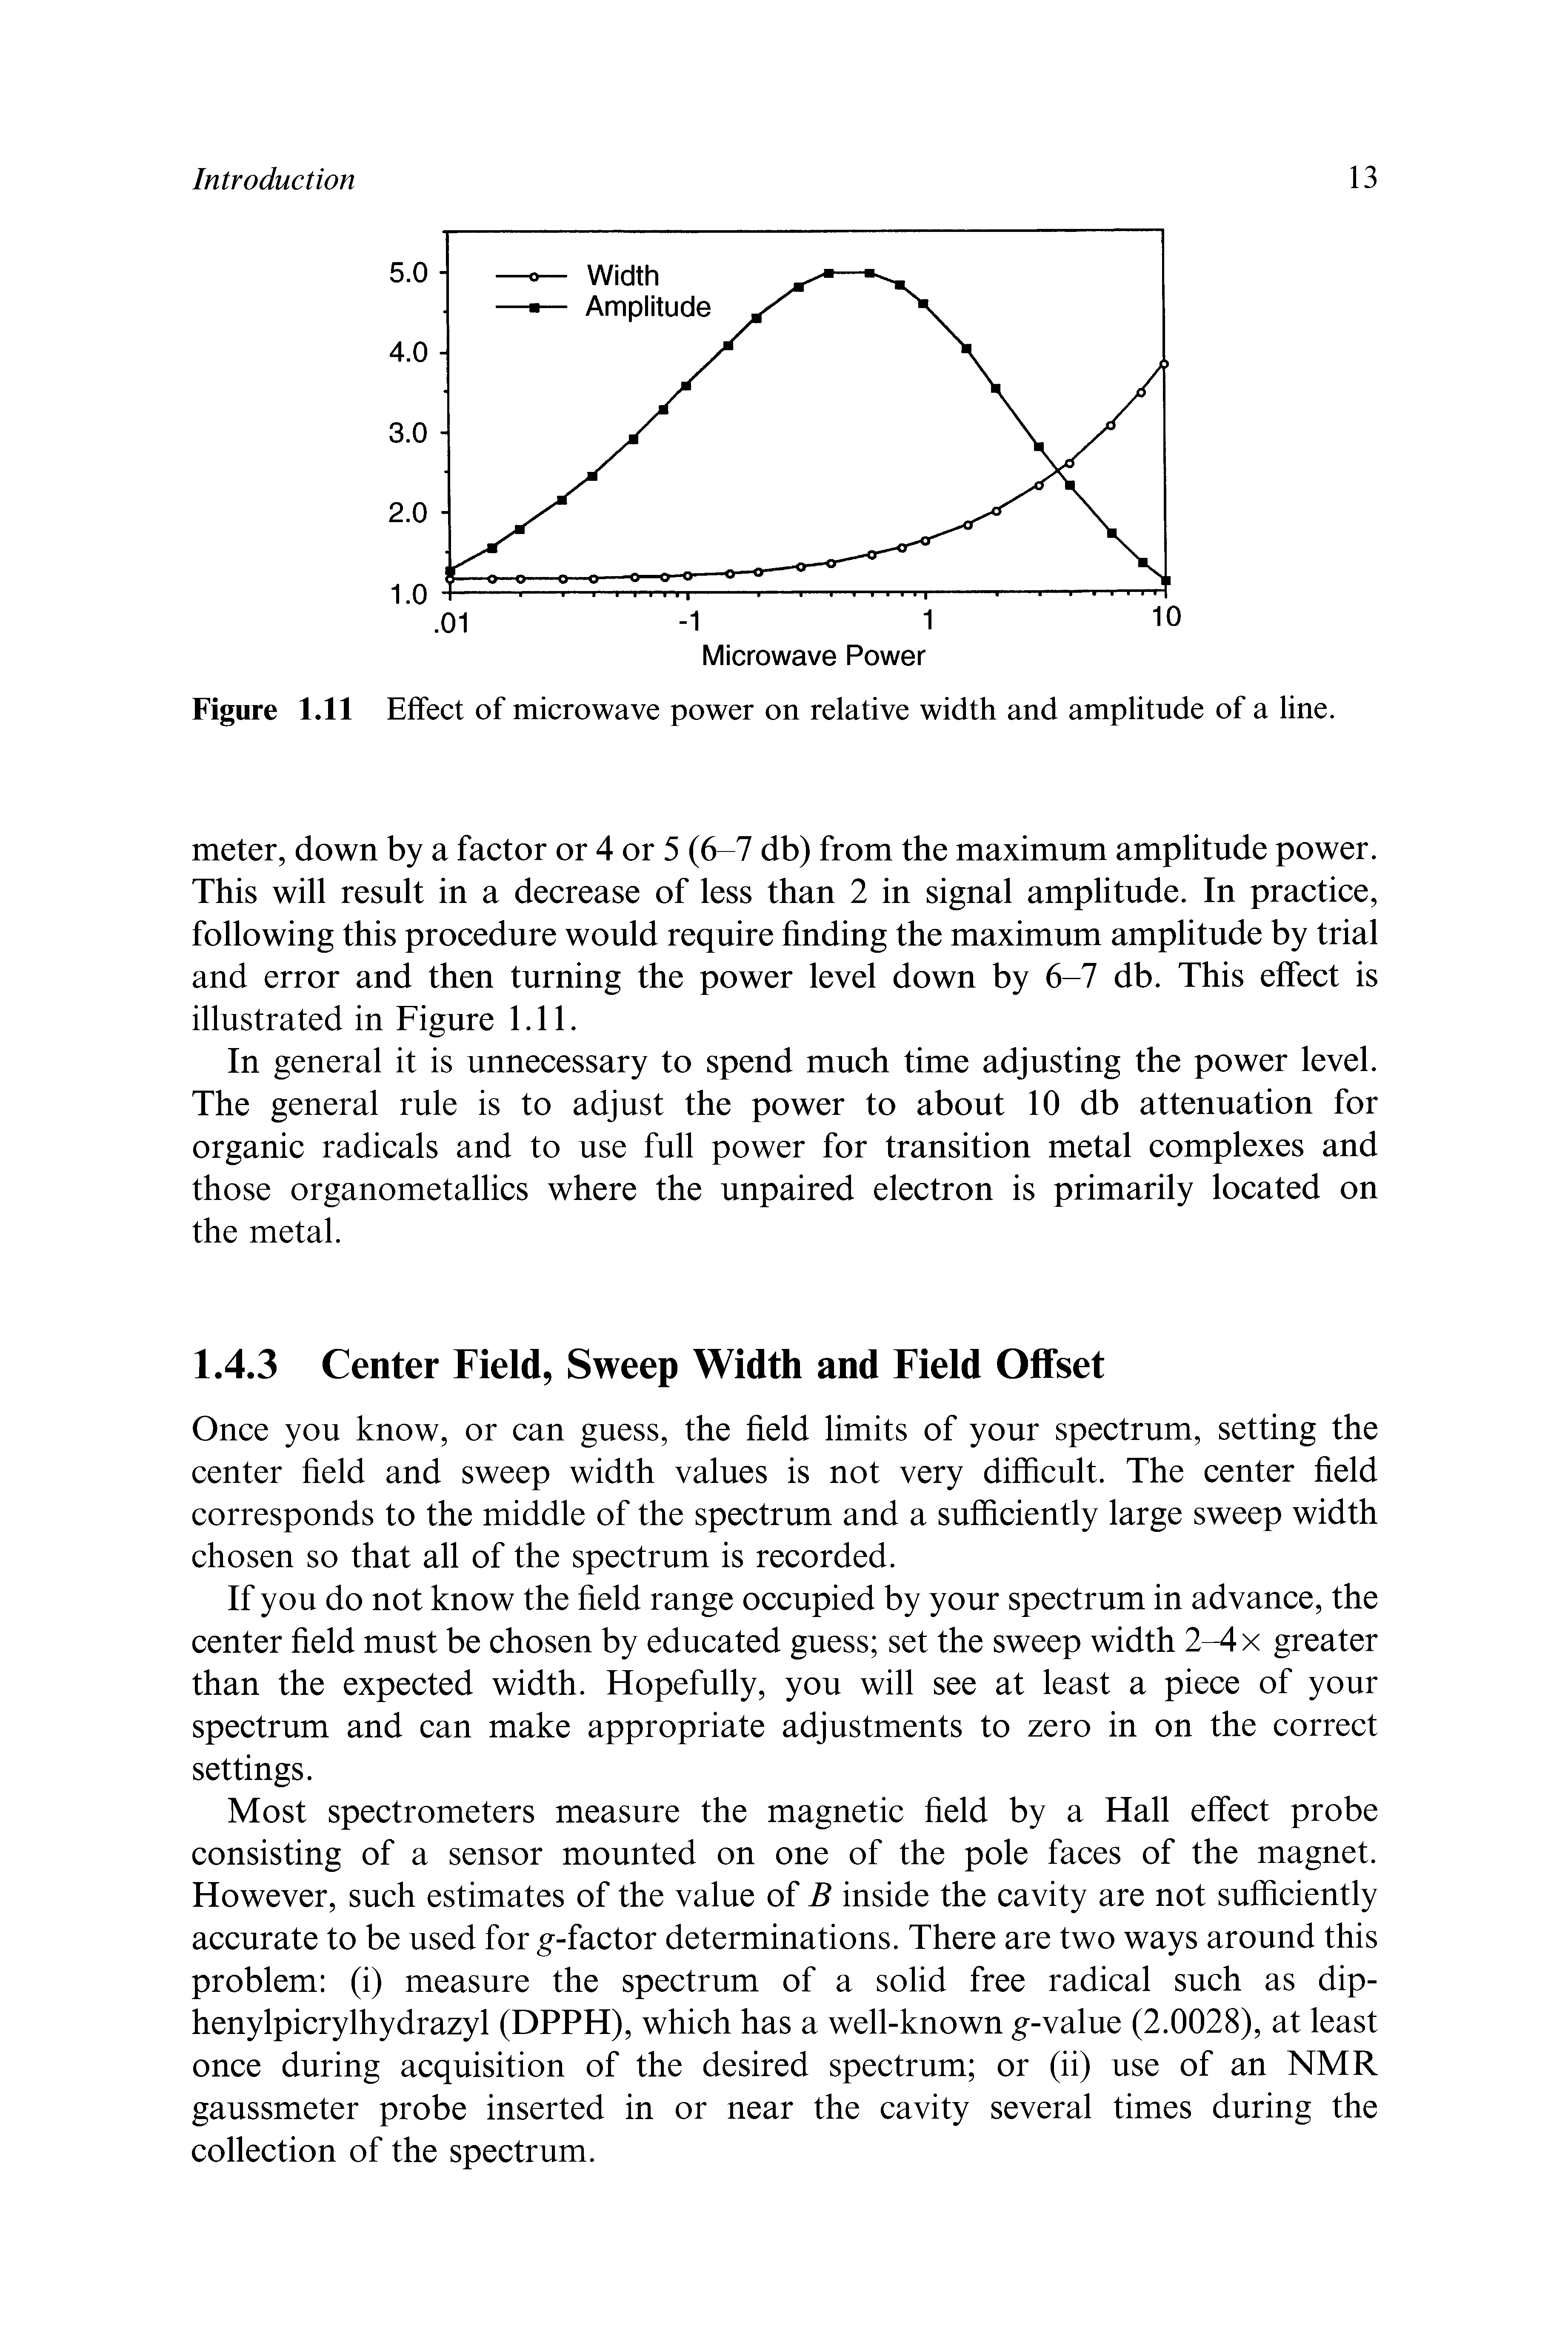 Figure 1.11 Effect of microwave power on relative width and amplitude of a line.